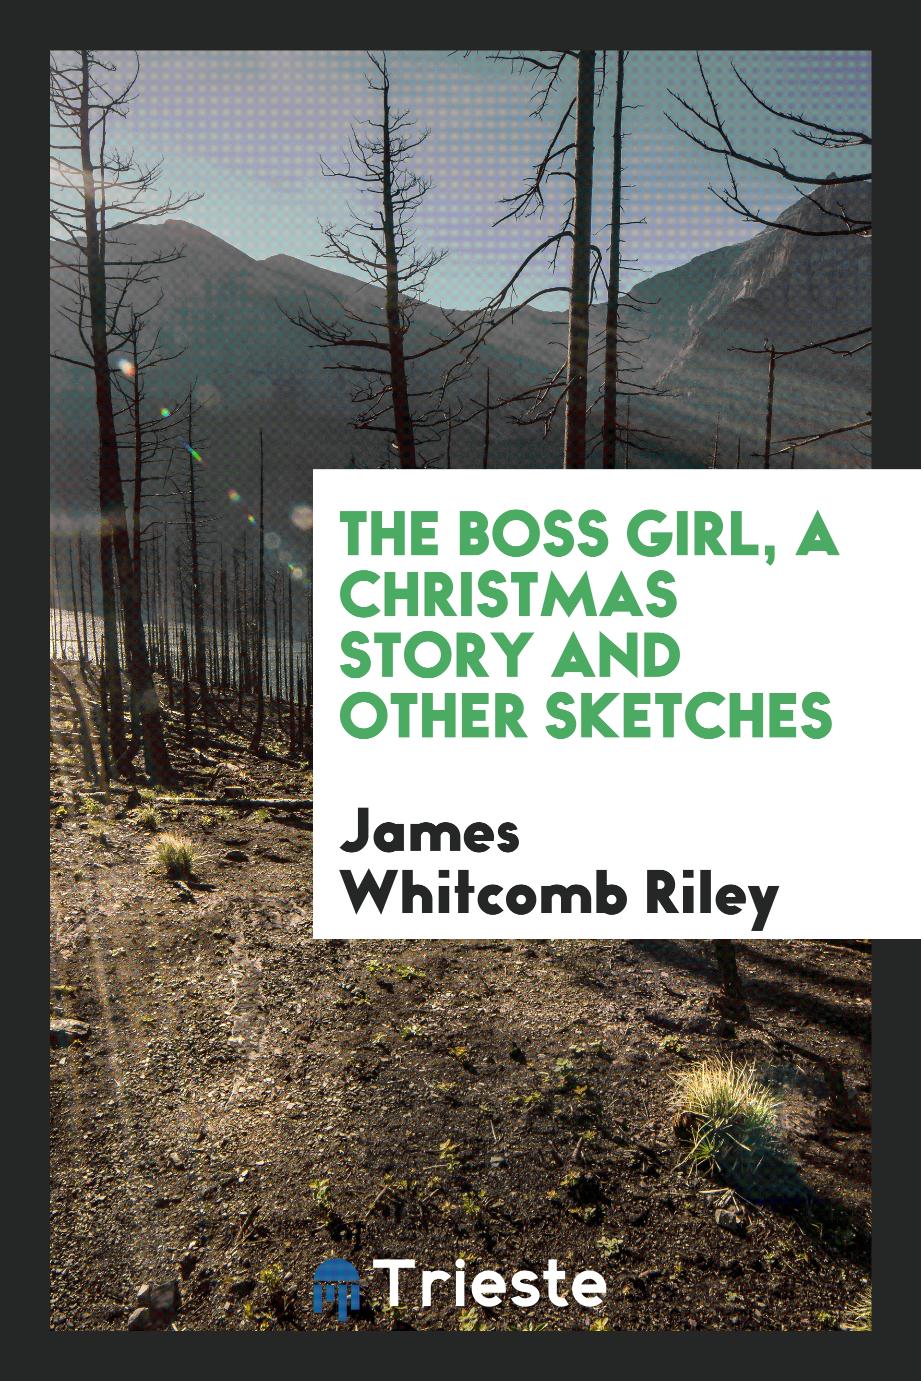 James Whitcomb Riley - The boss girl, a Christmas story and other sketches